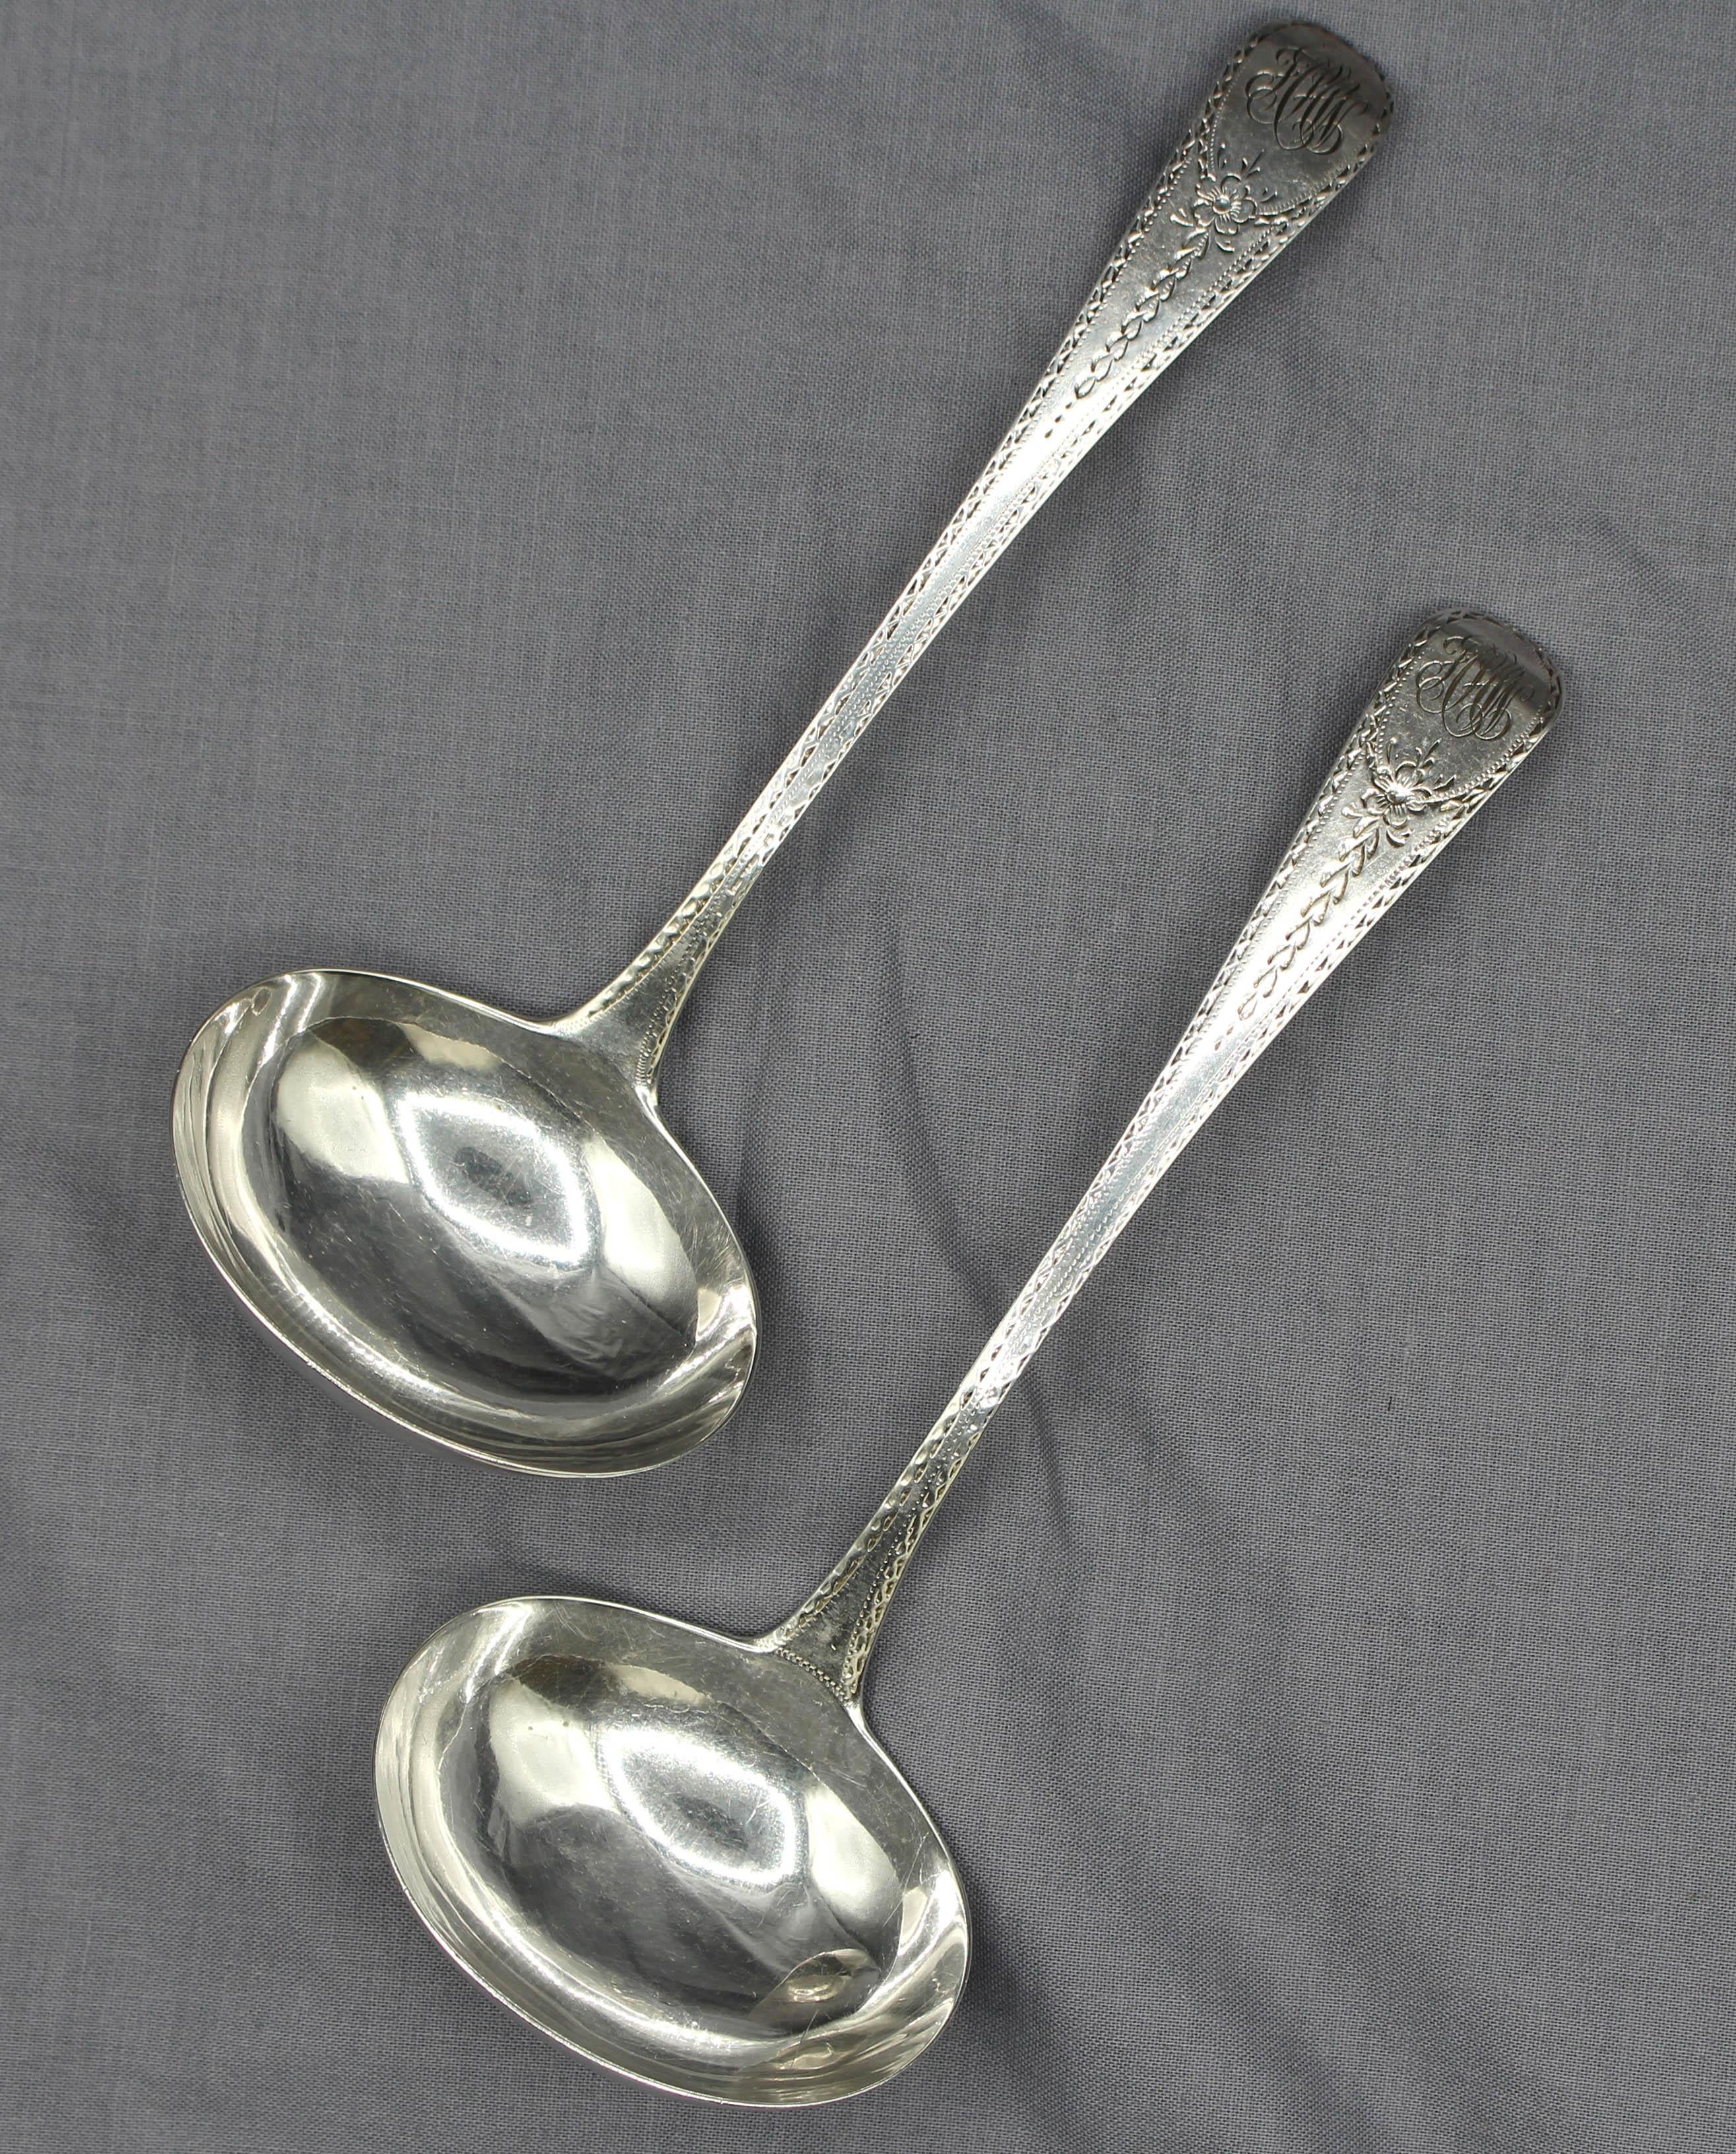 London, 1812, pair of Old English engraved pattern gravy ladles by John Lias. Sterling silver; feather edge. Later monogram. 2.80 troy oz. 
Measurements: 6 5/8